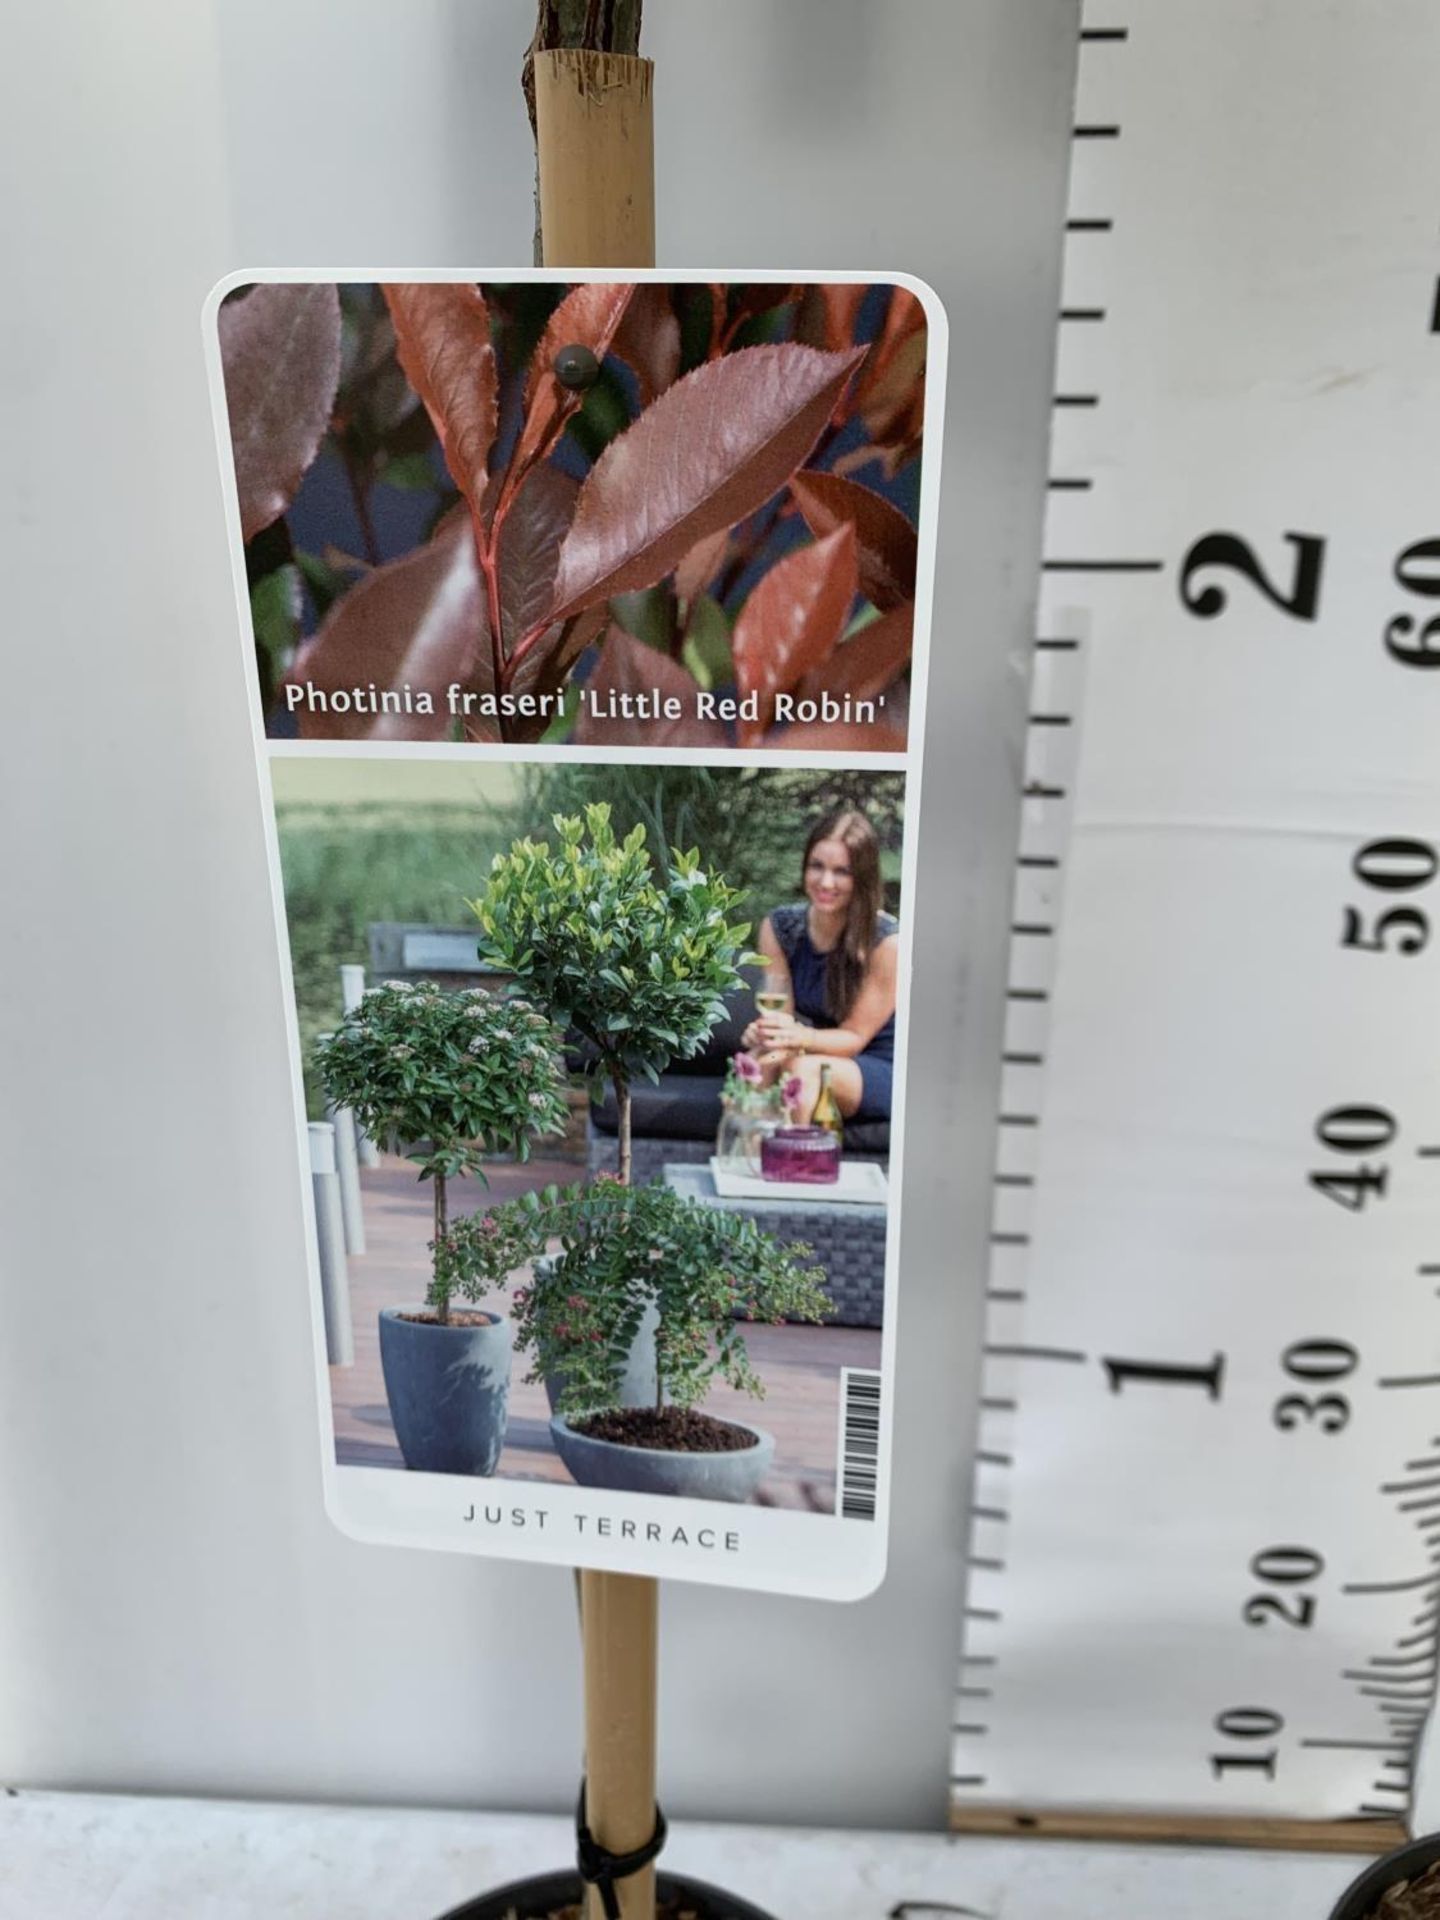 TWO PHOTINIA FRASERI STANDARD TREES 'LITTLE RED ROBIN' APPROX OVER ONE METRE IN HEIGHT IN 3LTR - Image 8 of 10